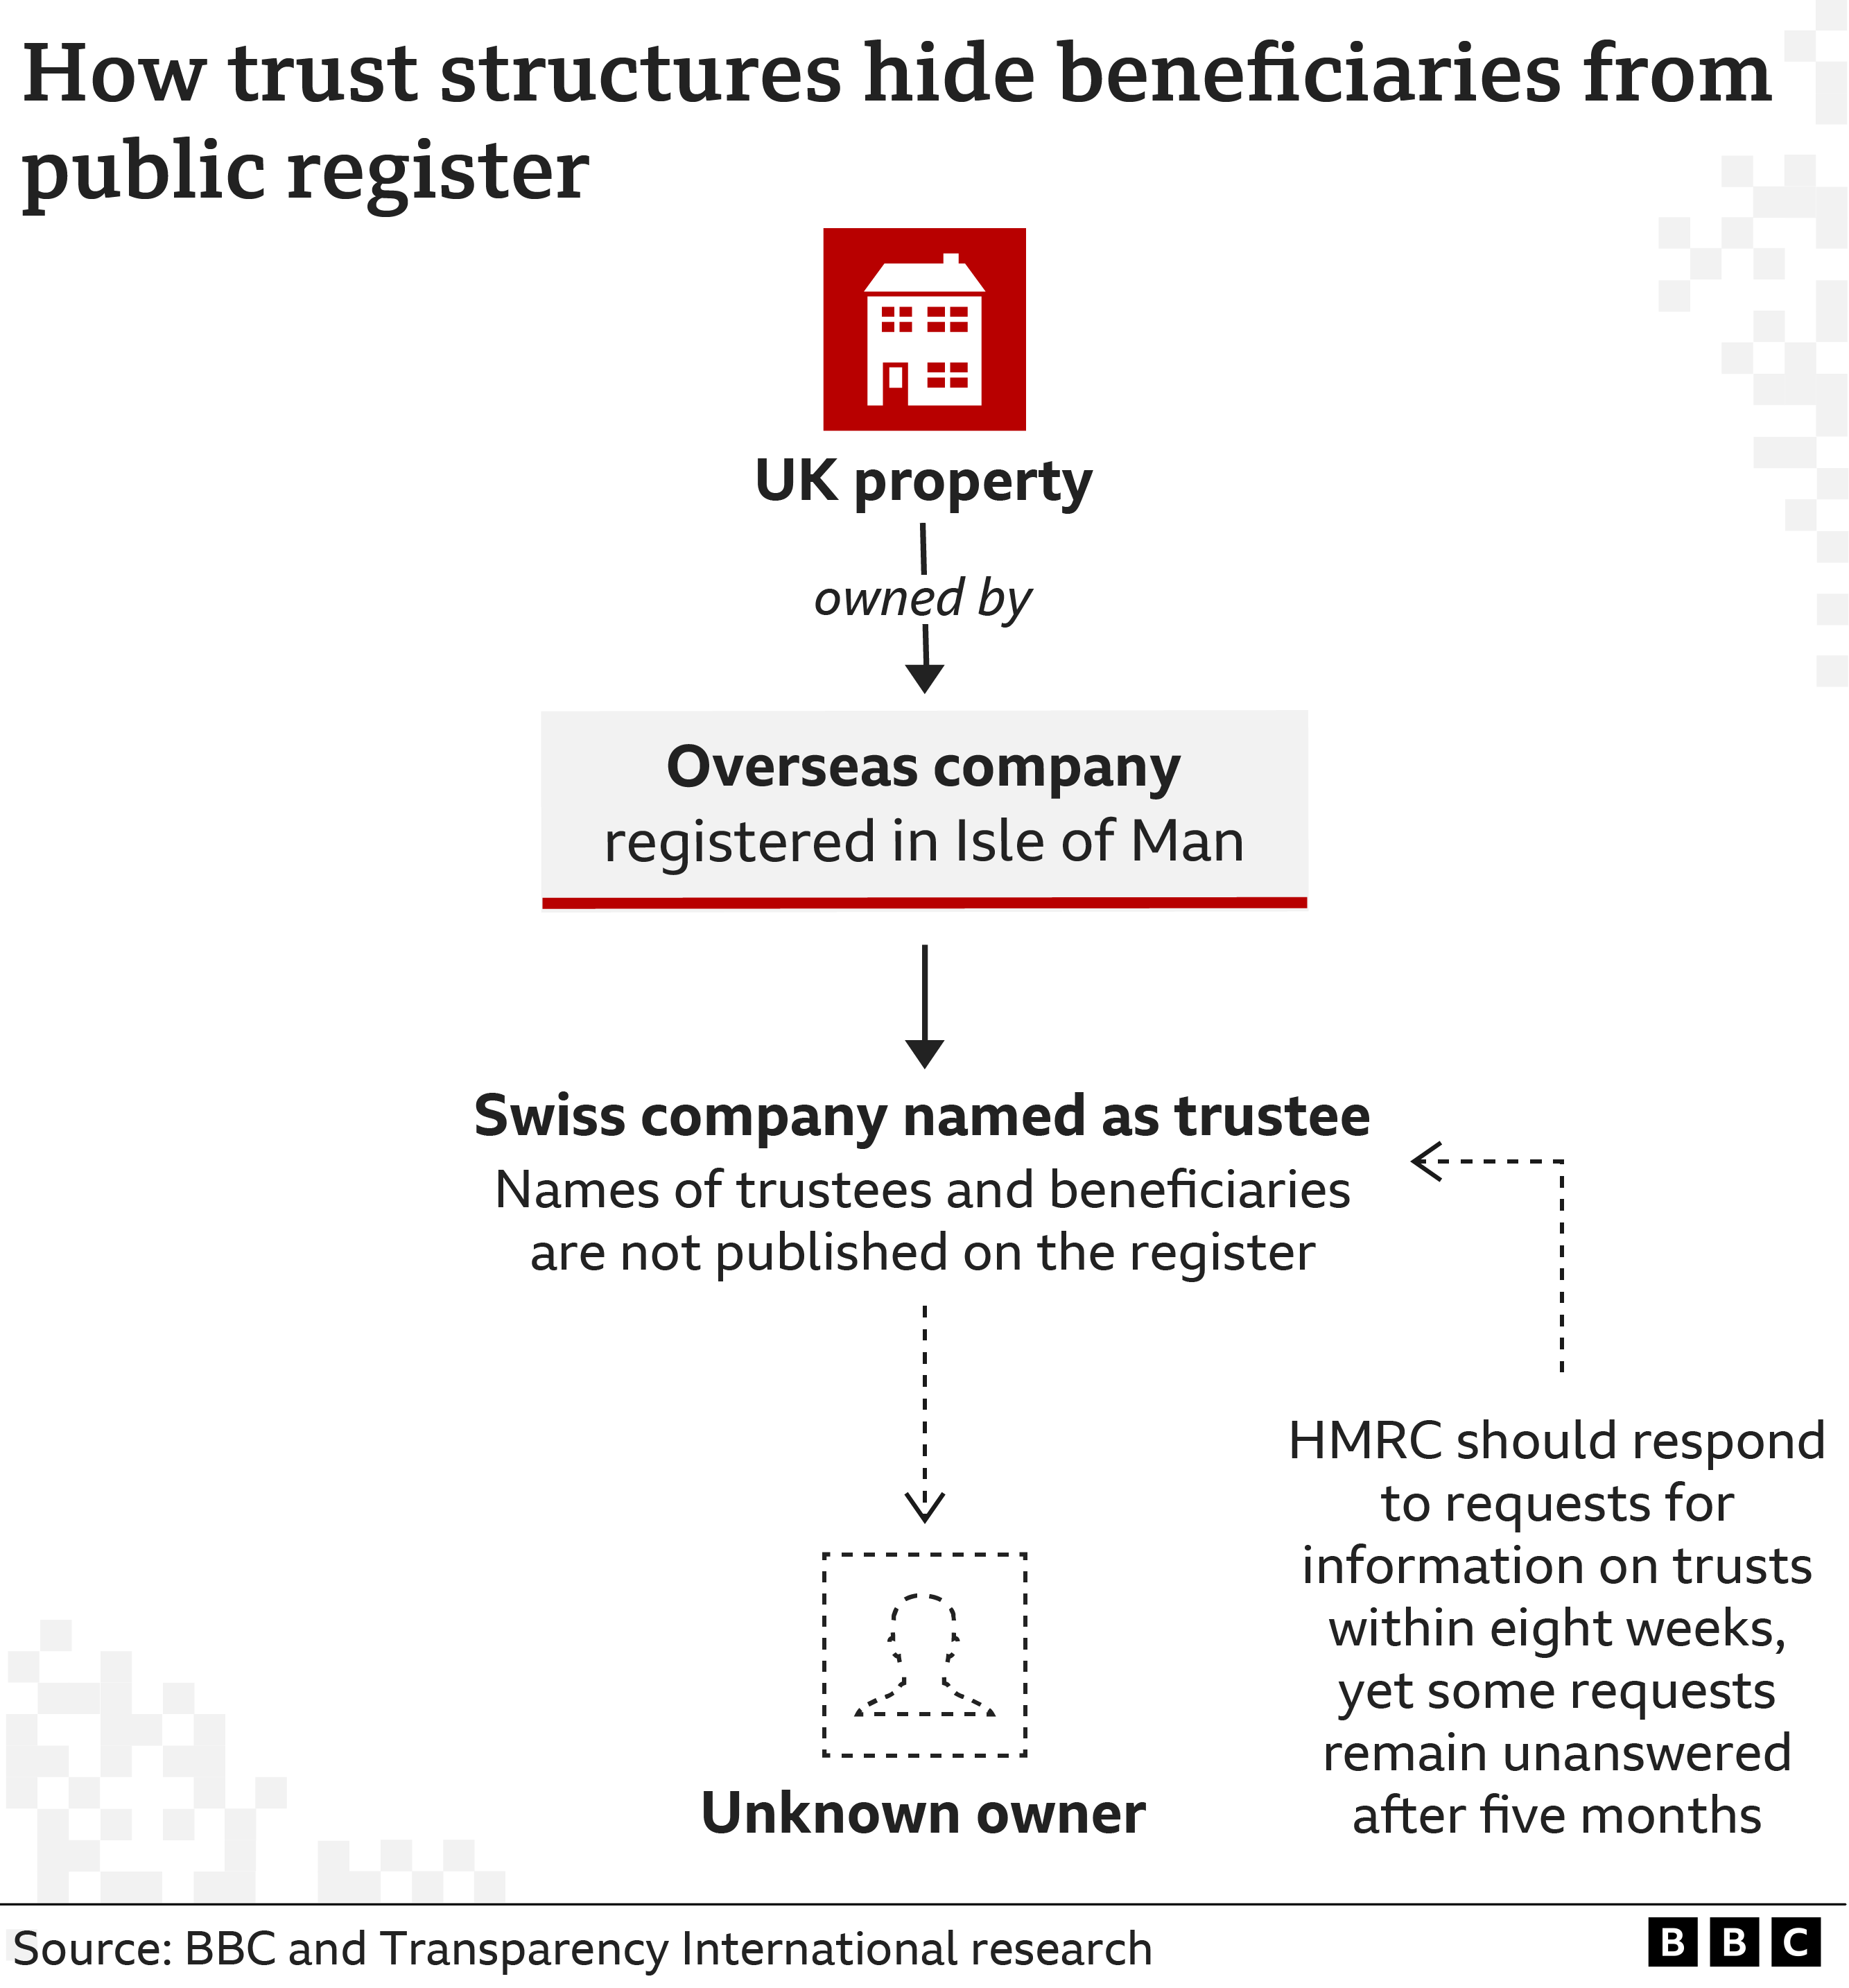 Flow chart showing that if a UK property is owned by an overseas company, which is owned by another overseas company through a trust structure, then it is exempt from publishing the individual owner.